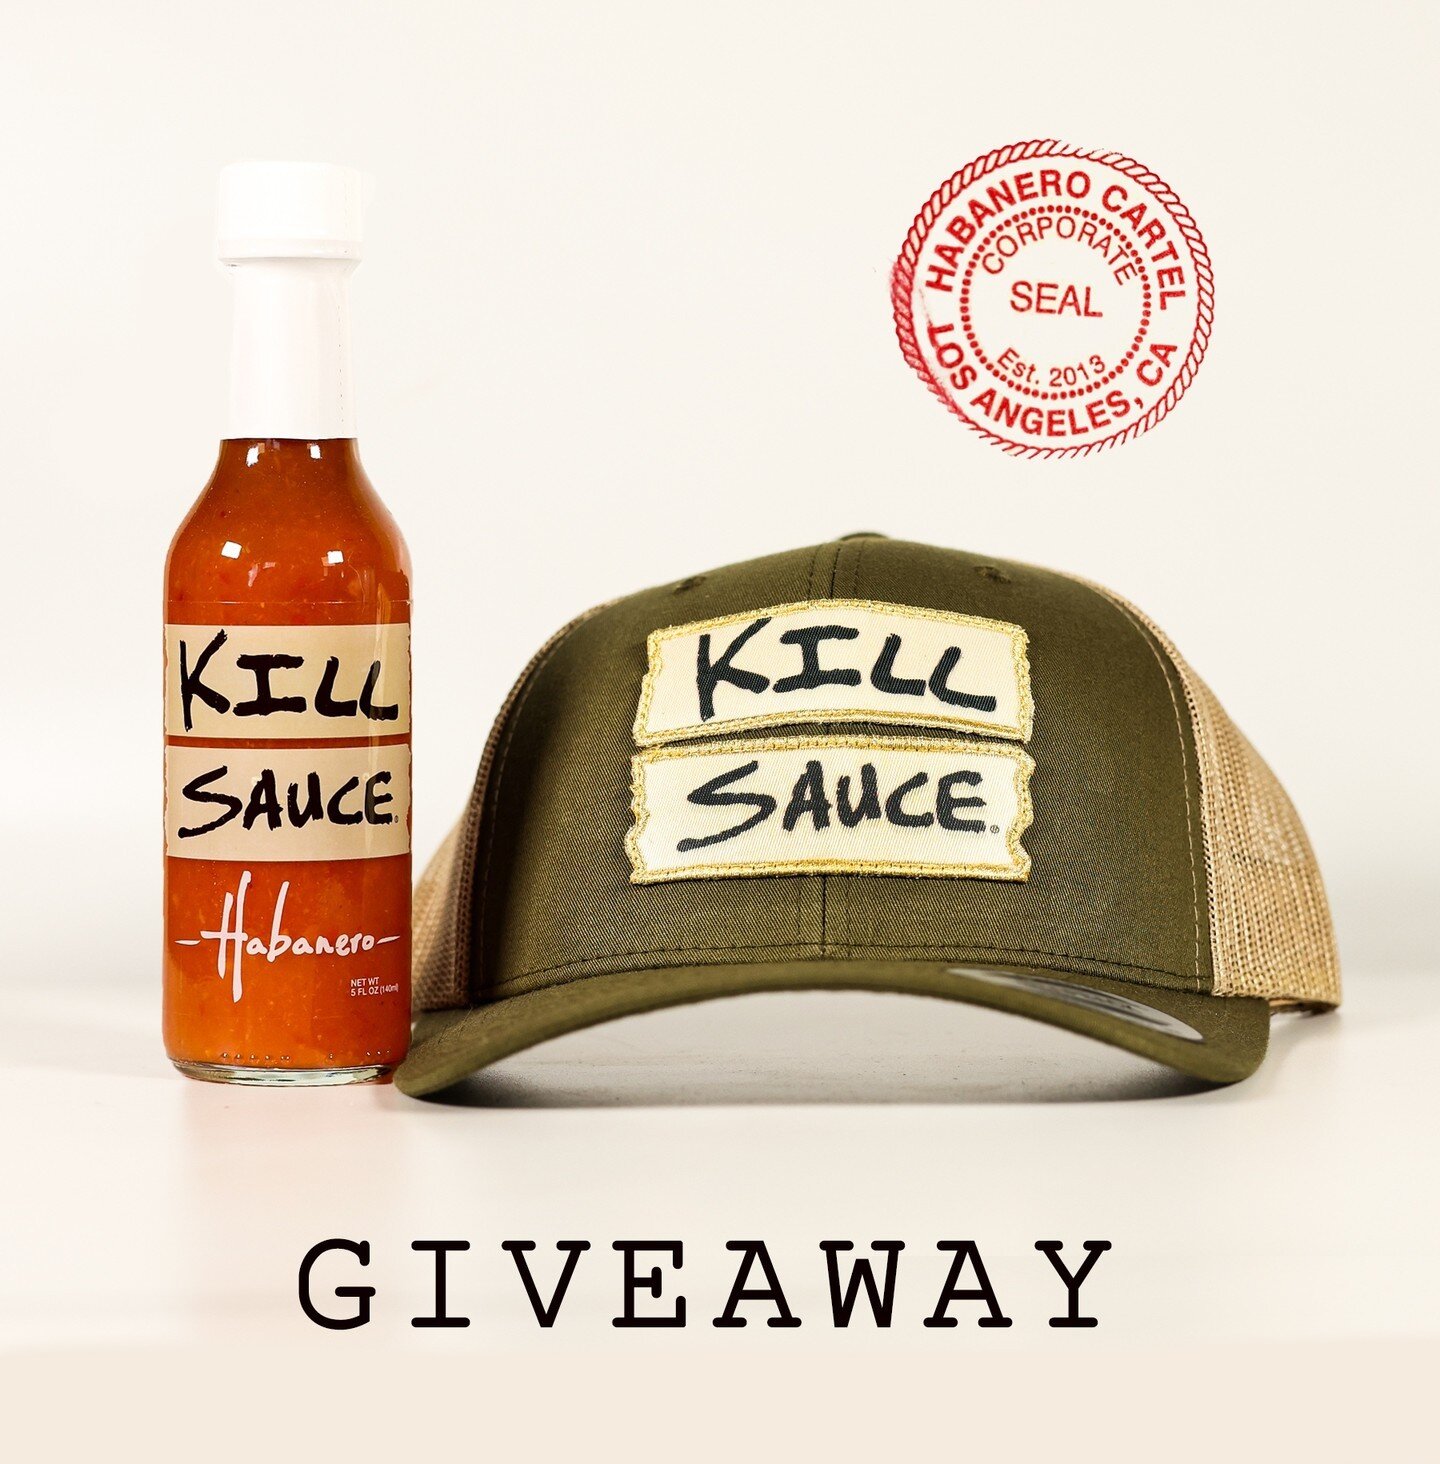 As a big thank you for all of the continued support it's give away time! We will be giving away one hat and a bottle of our Habanero sauce. Follow directions ⬇️ to enter.⁠
⁠
🔥 like this post⁠
🔥 follow our account⁠
🔥 tag a friend⁠
🔥 bonus entry pe